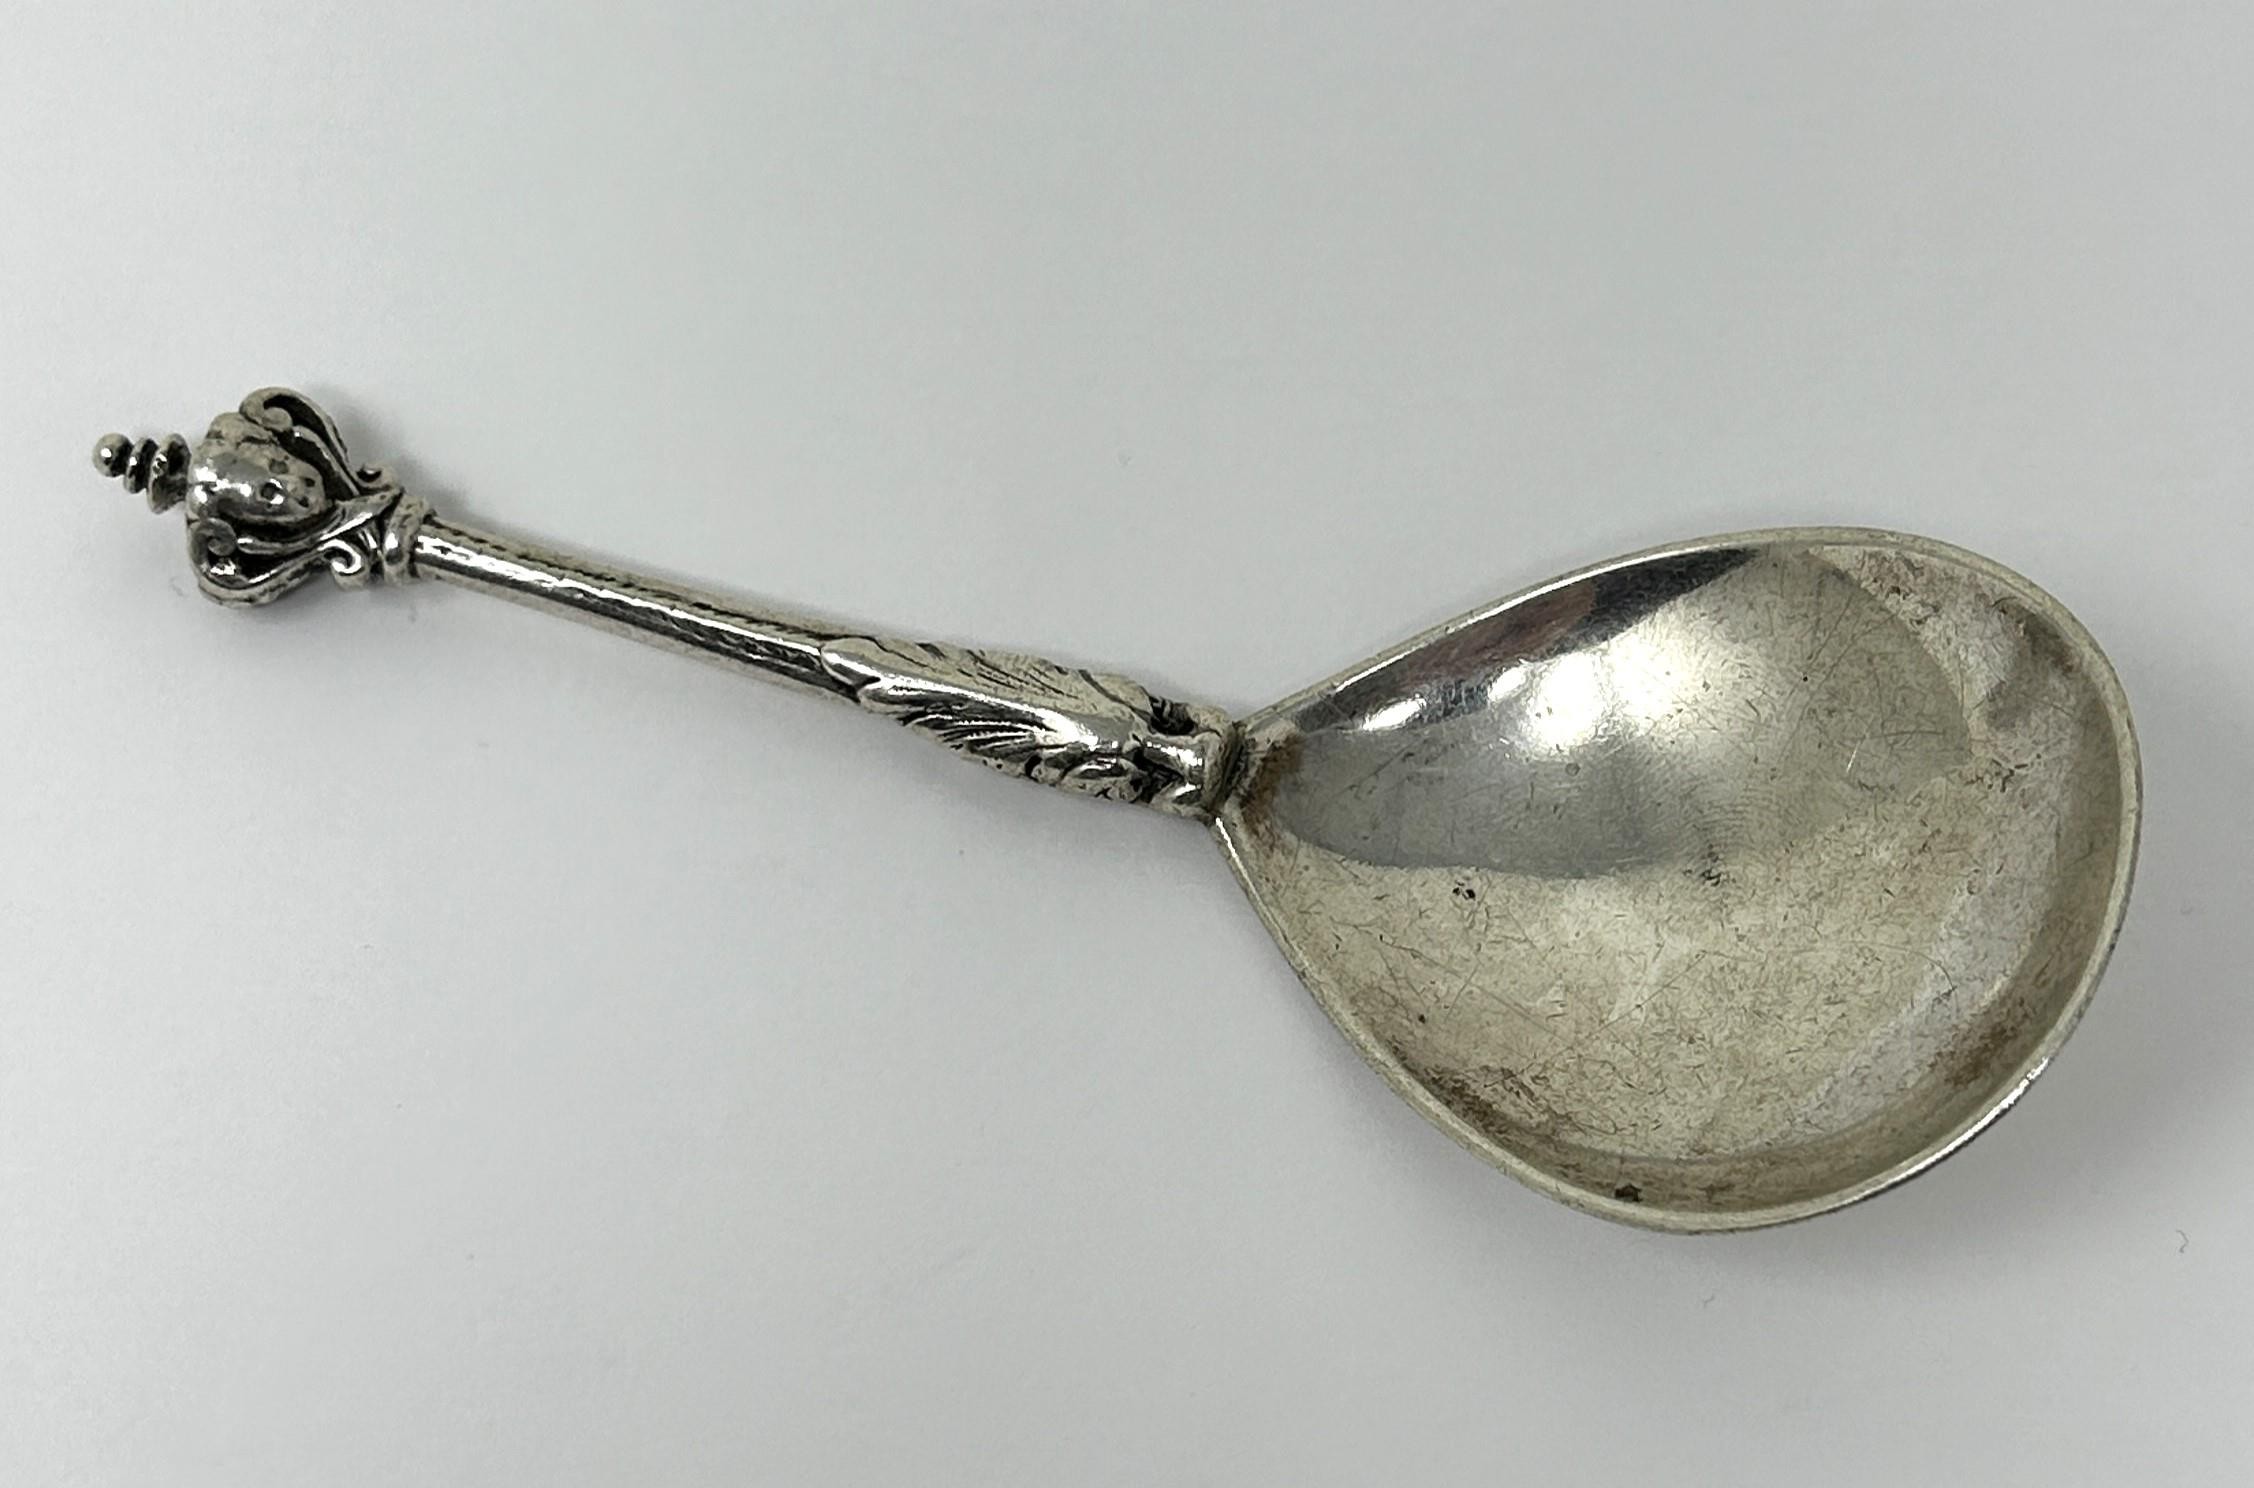 A silver coloured metal caddy spoon, 4 g